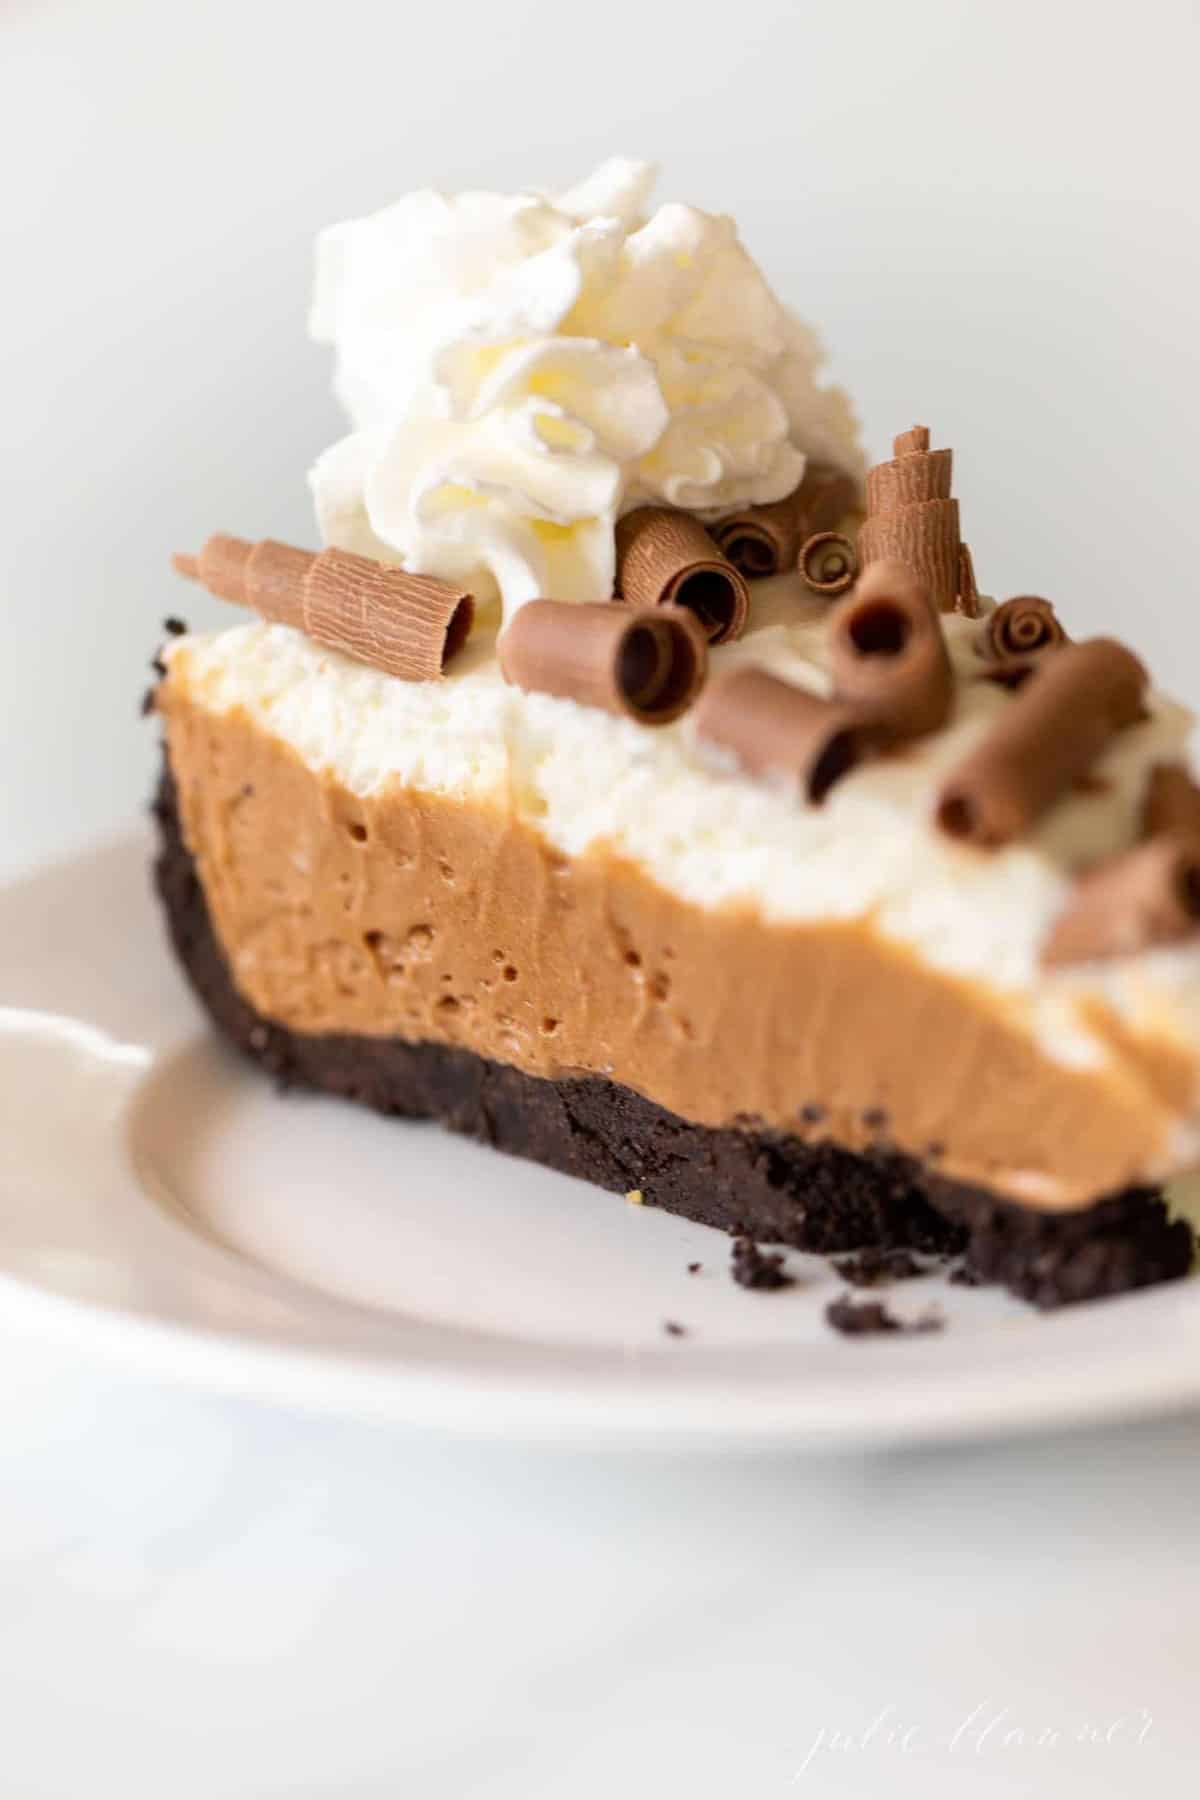 A slice of french silk pie in a chocolate pie crust on a white plate.